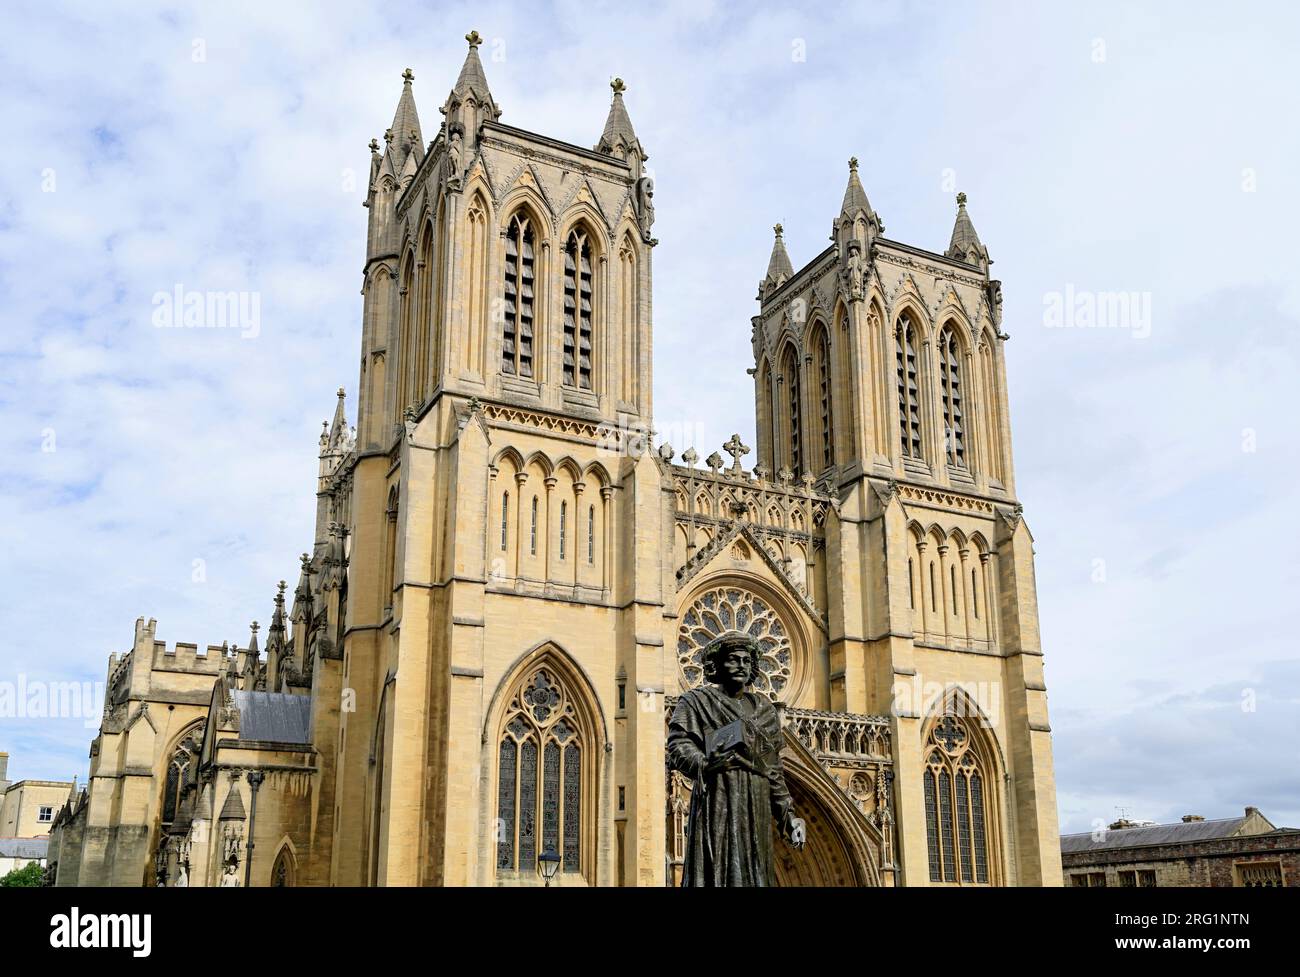 Bristol Cathedral and Statue of Raja Rammohun Roy 1 born in Bengall in 1774 a social reformer who died in Bristol in 1833. Stock Photo